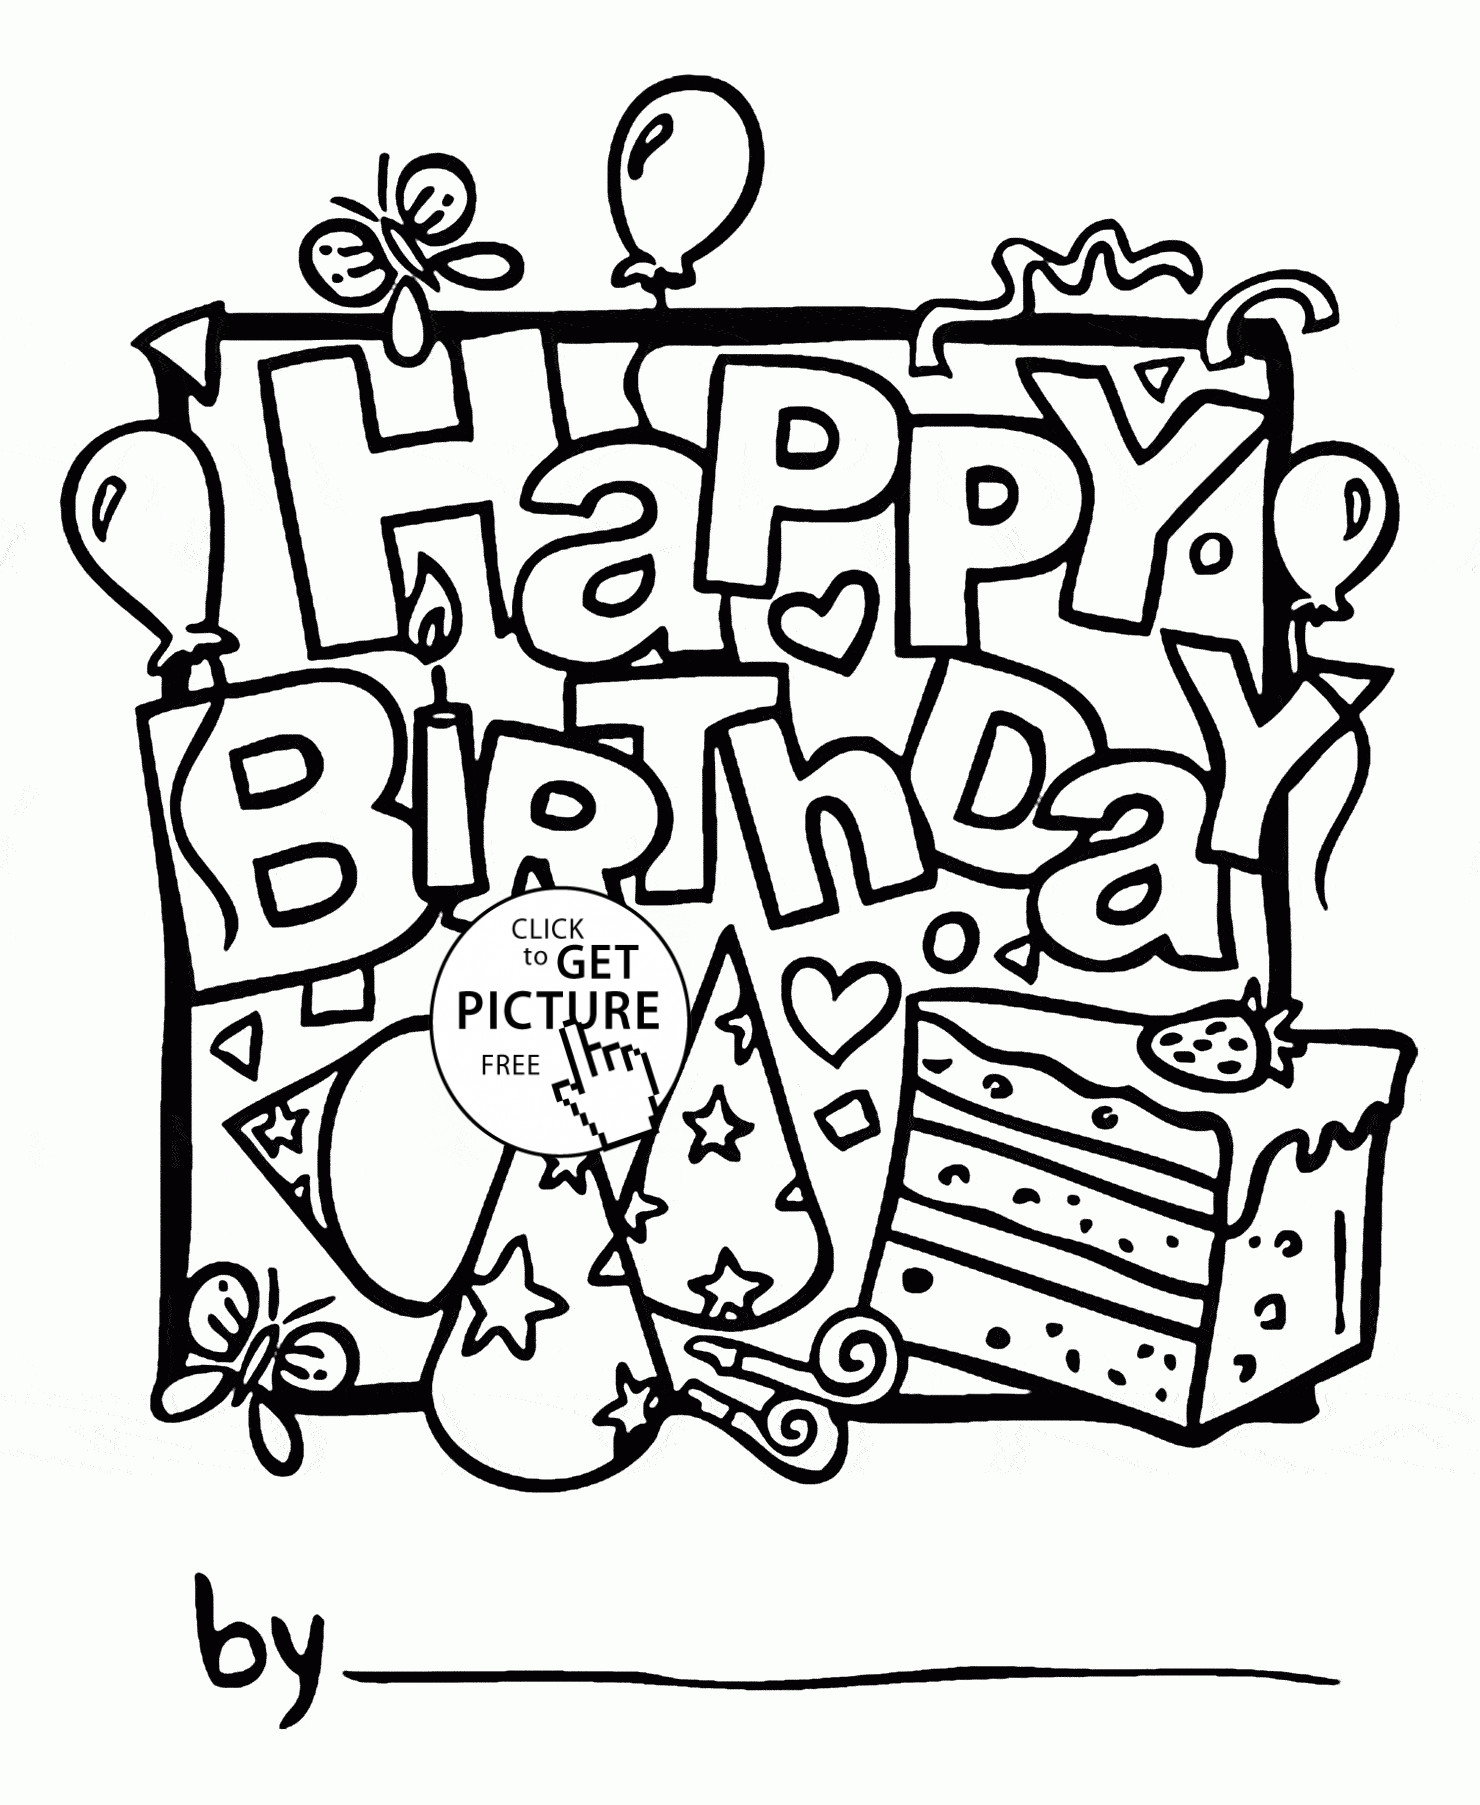 Happy Birthday Coloring Pages For Boys
 Coloring Pages Birthday Card For Boy Coloring Home